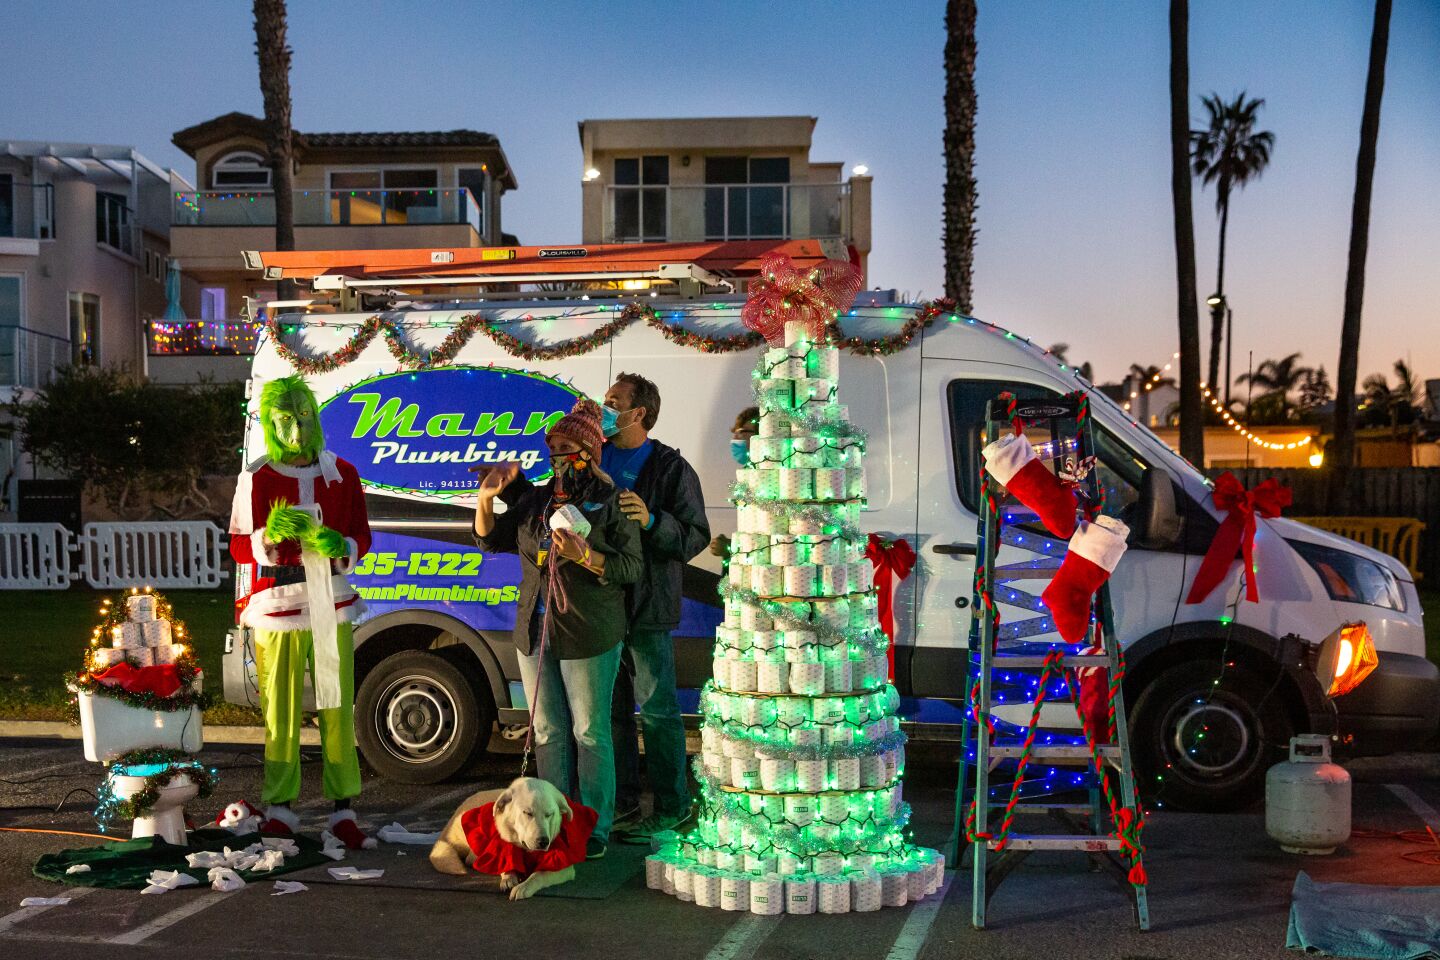 Mann Plumbing and the other participants in the Ocean Beach Holiday Parade weren't about to let the tradition go down the toilet, though the coronavirus pandemic did force a "reverse" format.